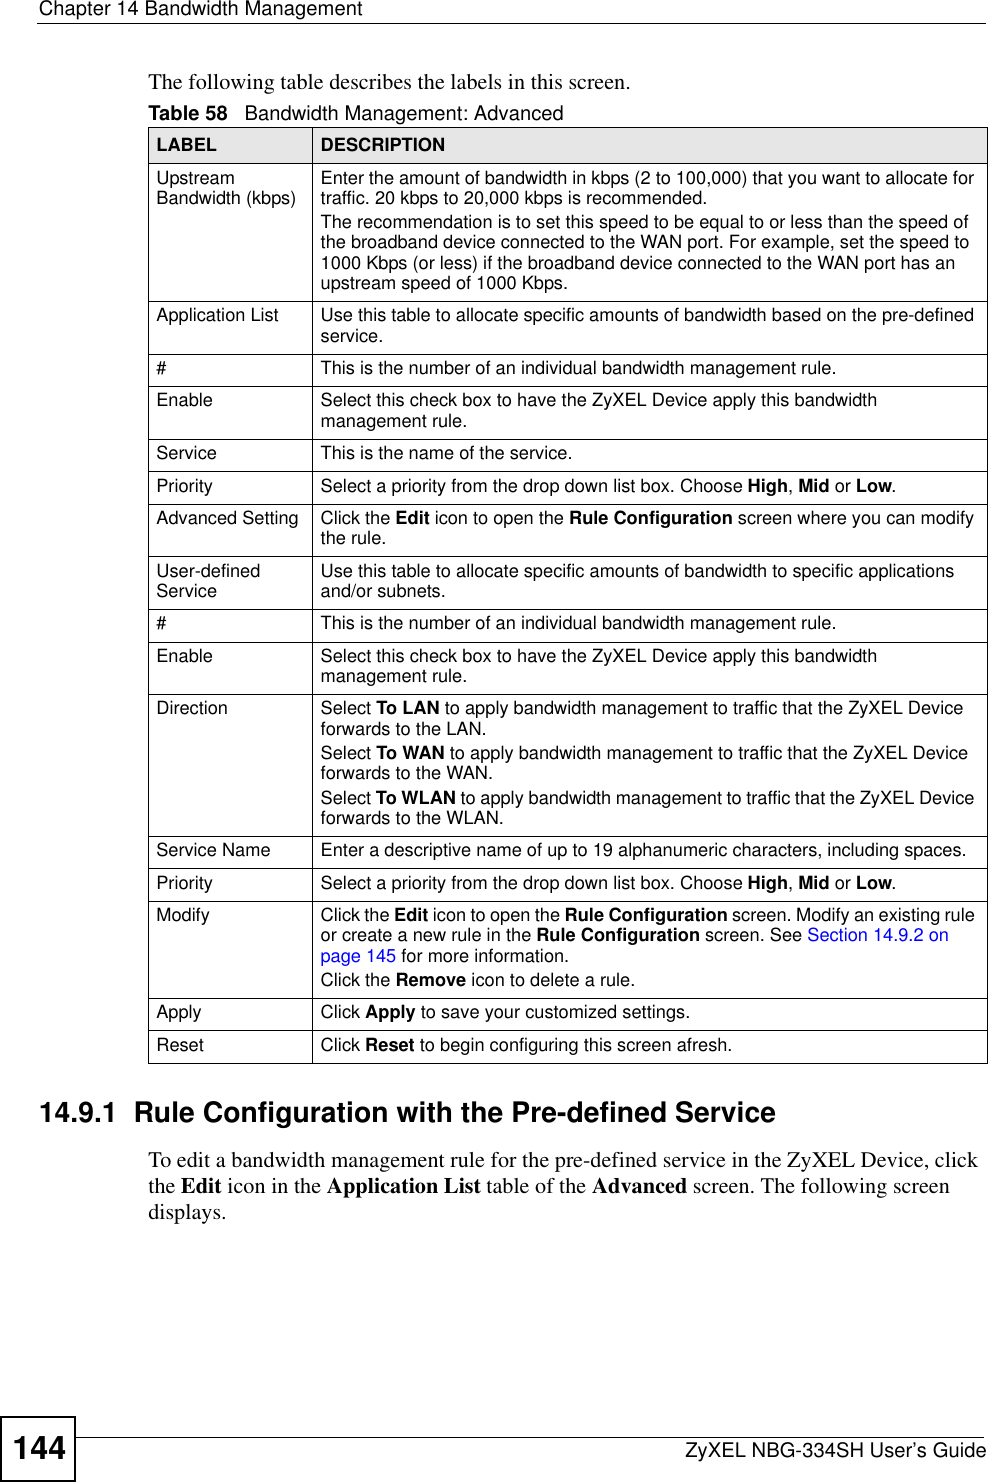 Chapter 14 Bandwidth ManagementZyXEL NBG-334SH User’s Guide144The following table describes the labels in this screen.14.9.1  Rule Configuration with the Pre-defined ServiceTo edit a bandwidth management rule for the pre-defined service in the ZyXEL Device, click the Edit icon in the Application List table of the Advanced screen. The following screen displays.Table 58   Bandwidth Management: AdvancedLABEL DESCRIPTIONUpstream Bandwidth (kbps)  Enter the amount of bandwidth in kbps (2 to 100,000) that you want to allocate for traffic. 20 kbps to 20,000 kbps is recommended.The recommendation is to set this speed to be equal to or less than the speed of the broadband device connected to the WAN port. For example, set the speed to 1000 Kbps (or less) if the broadband device connected to the WAN port has an upstream speed of 1000 Kbps.Application List Use this table to allocate specific amounts of bandwidth based on the pre-defined service.#This is the number of an individual bandwidth management rule.Enable Select this check box to have the ZyXEL Device apply this bandwidth management rule.Service This is the name of the service.Priority Select a priority from the drop down list box. Choose High,Mid or Low.Advanced Setting  Click the Edit icon to open the Rule Configuration screen where you can modify the rule.User-defined Service  Use this table to allocate specific amounts of bandwidth to specific applications and/or subnets.#This is the number of an individual bandwidth management rule.Enable Select this check box to have the ZyXEL Device apply this bandwidth management rule.Direction Select To LAN to apply bandwidth management to traffic that the ZyXEL Device forwards to the LAN. Select To WAN to apply bandwidth management to traffic that the ZyXEL Device forwards to the WAN. Select To WLAN to apply bandwidth management to traffic that the ZyXEL Device forwards to the WLAN. Service Name Enter a descriptive name of up to 19 alphanumeric characters, including spaces.Priority Select a priority from the drop down list box. Choose High,Mid or Low.Modify Click the Edit icon to open the Rule Configuration screen. Modify an existing rule or create a new rule in the Rule Configuration screen. See Section 14.9.2 on page 145 for more information.Click the Remove icon to delete a rule.Apply Click Apply to save your customized settings.Reset Click Reset to begin configuring this screen afresh.